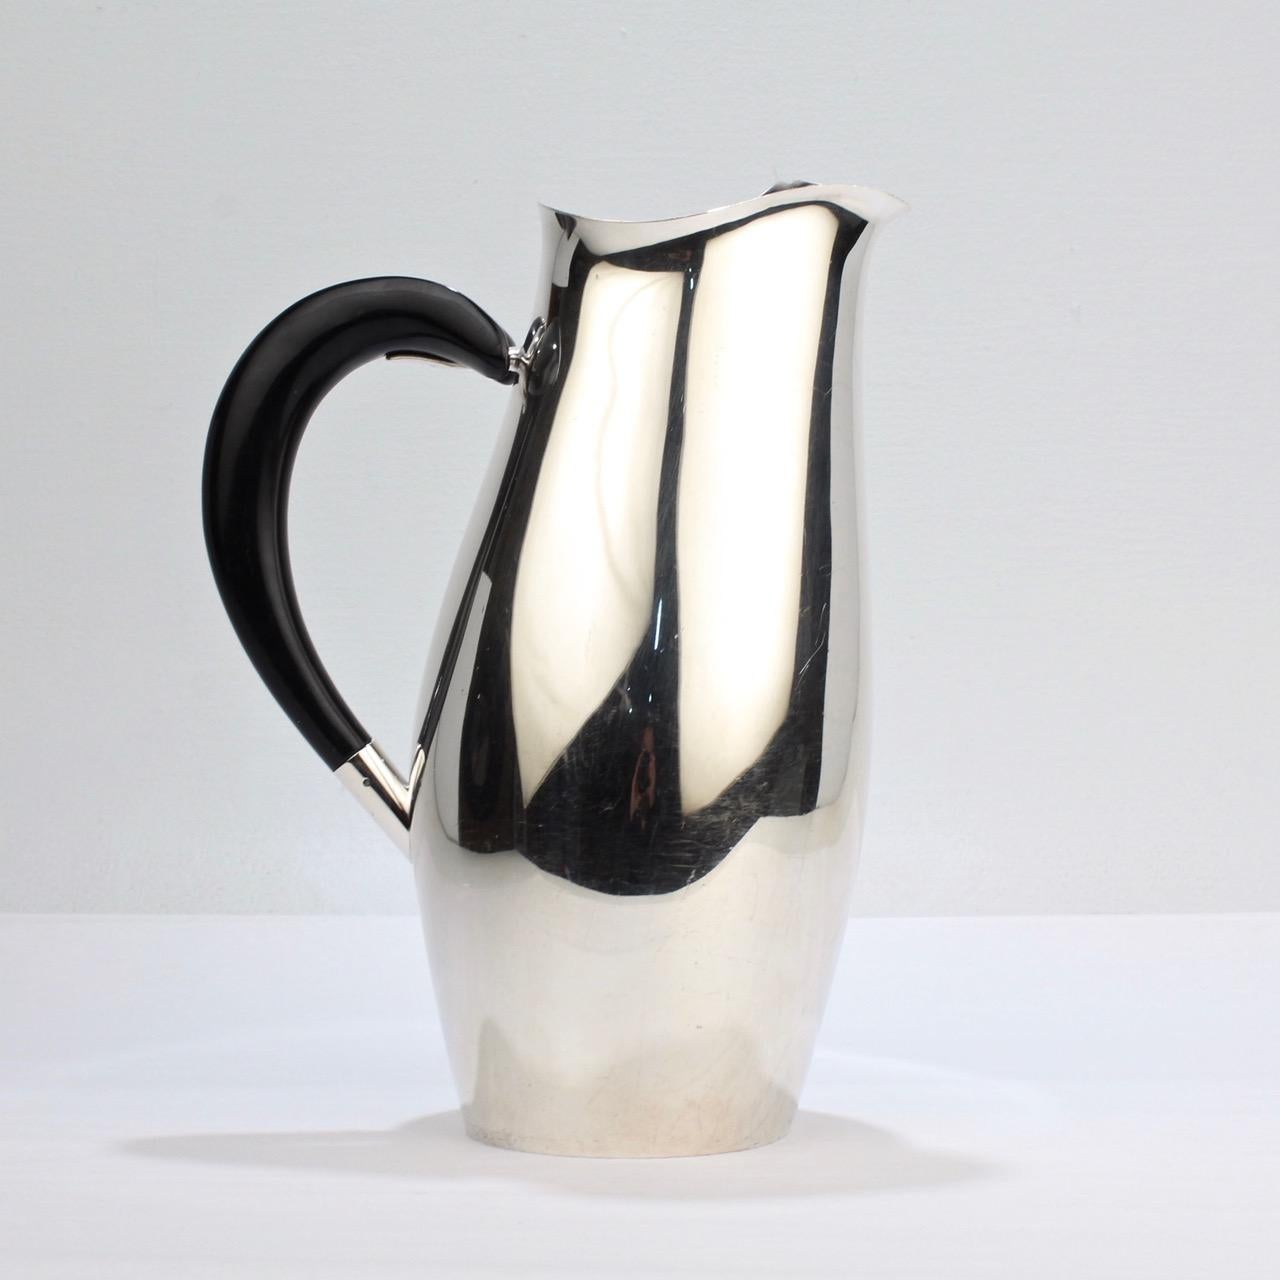 Women's or Men's Contour Silver Plated Cocktail Pitcher by Robert King & John Van Koert for Towle